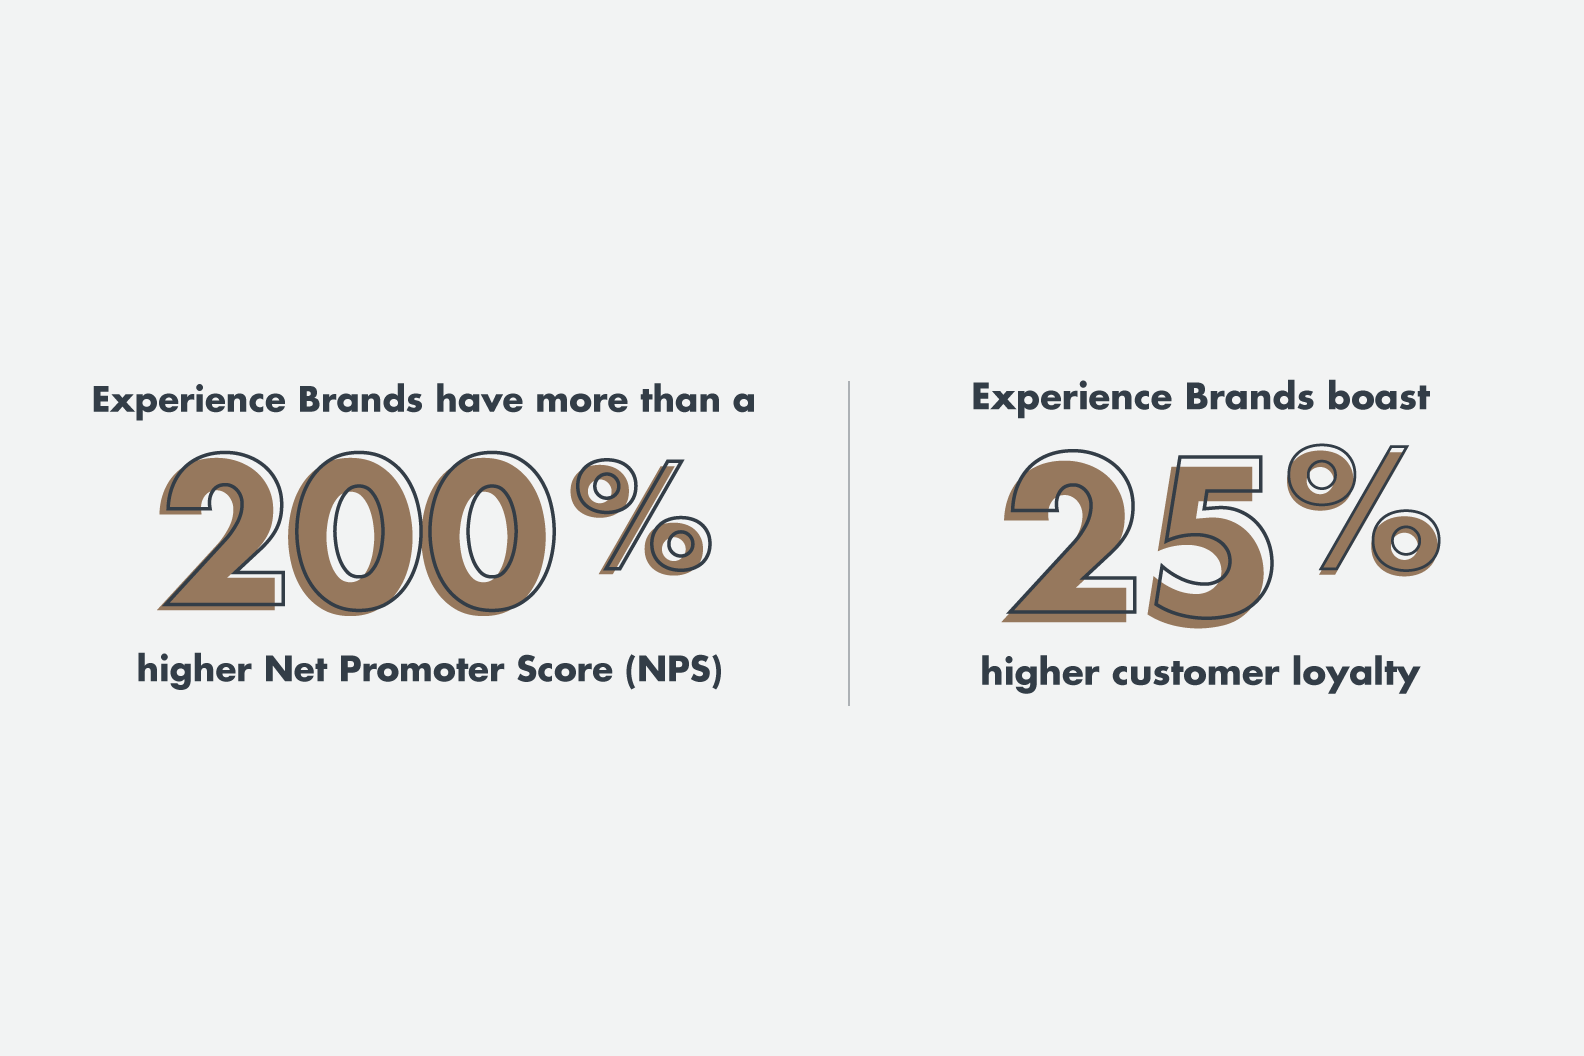 Report Reveals Half of All Consumers Skeptical About Brand Promises and Demand Proof